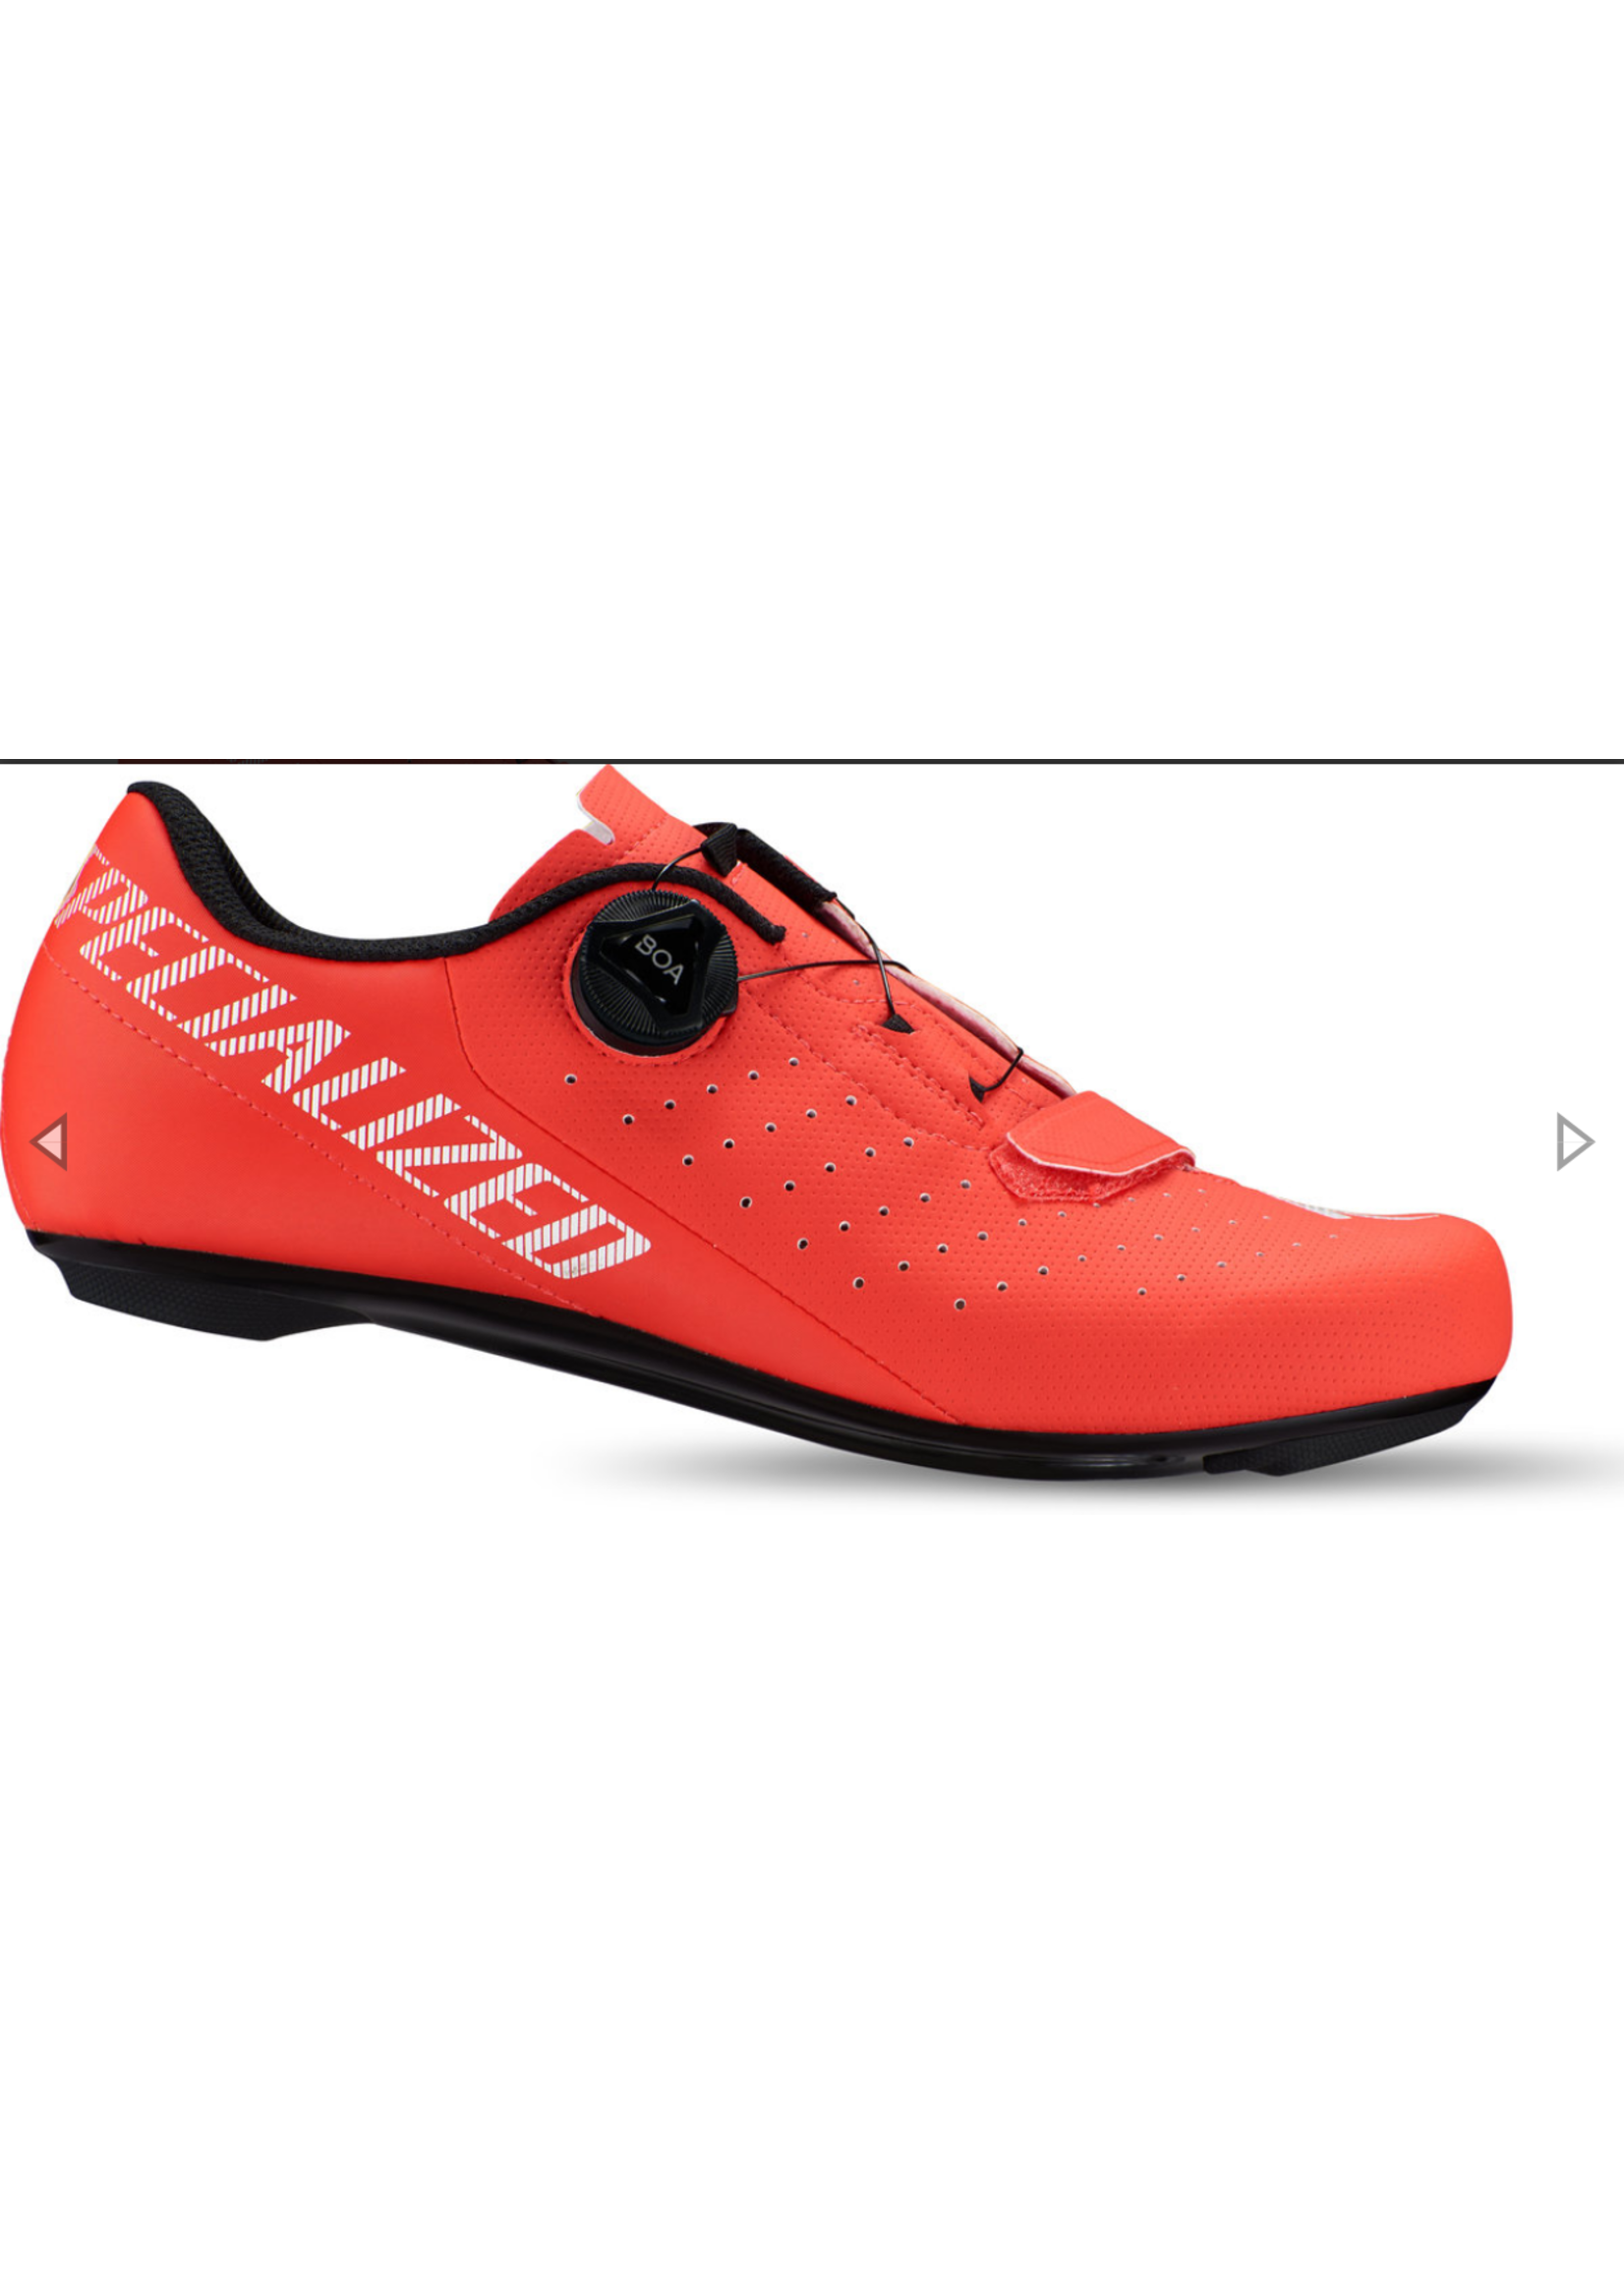 Specialized TORCH 1.0 RD SHOE